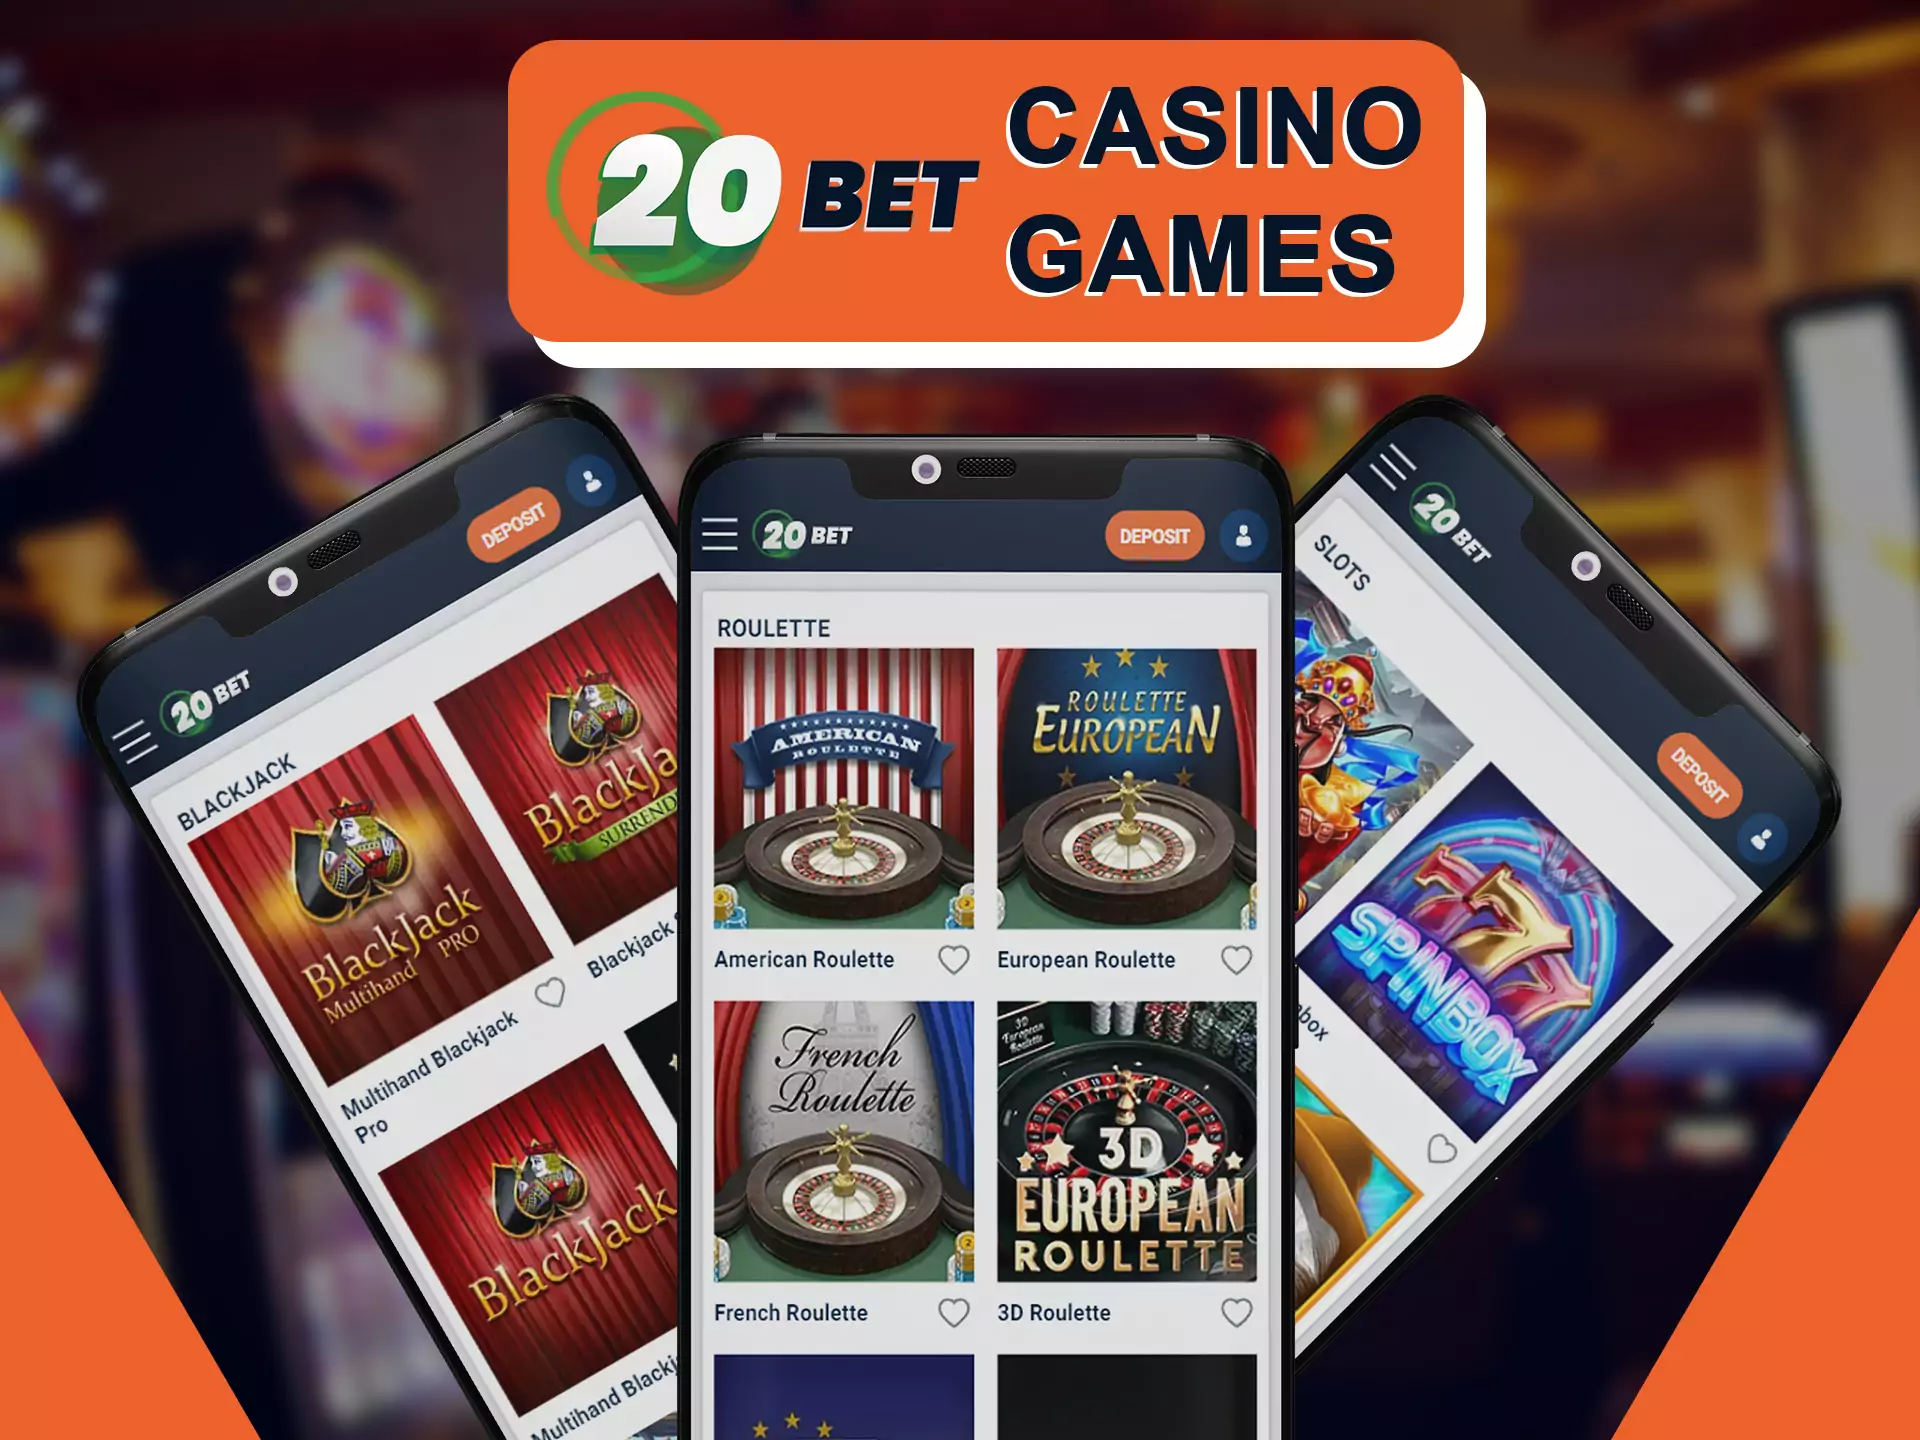 Play your favourite casino games at 20bet.